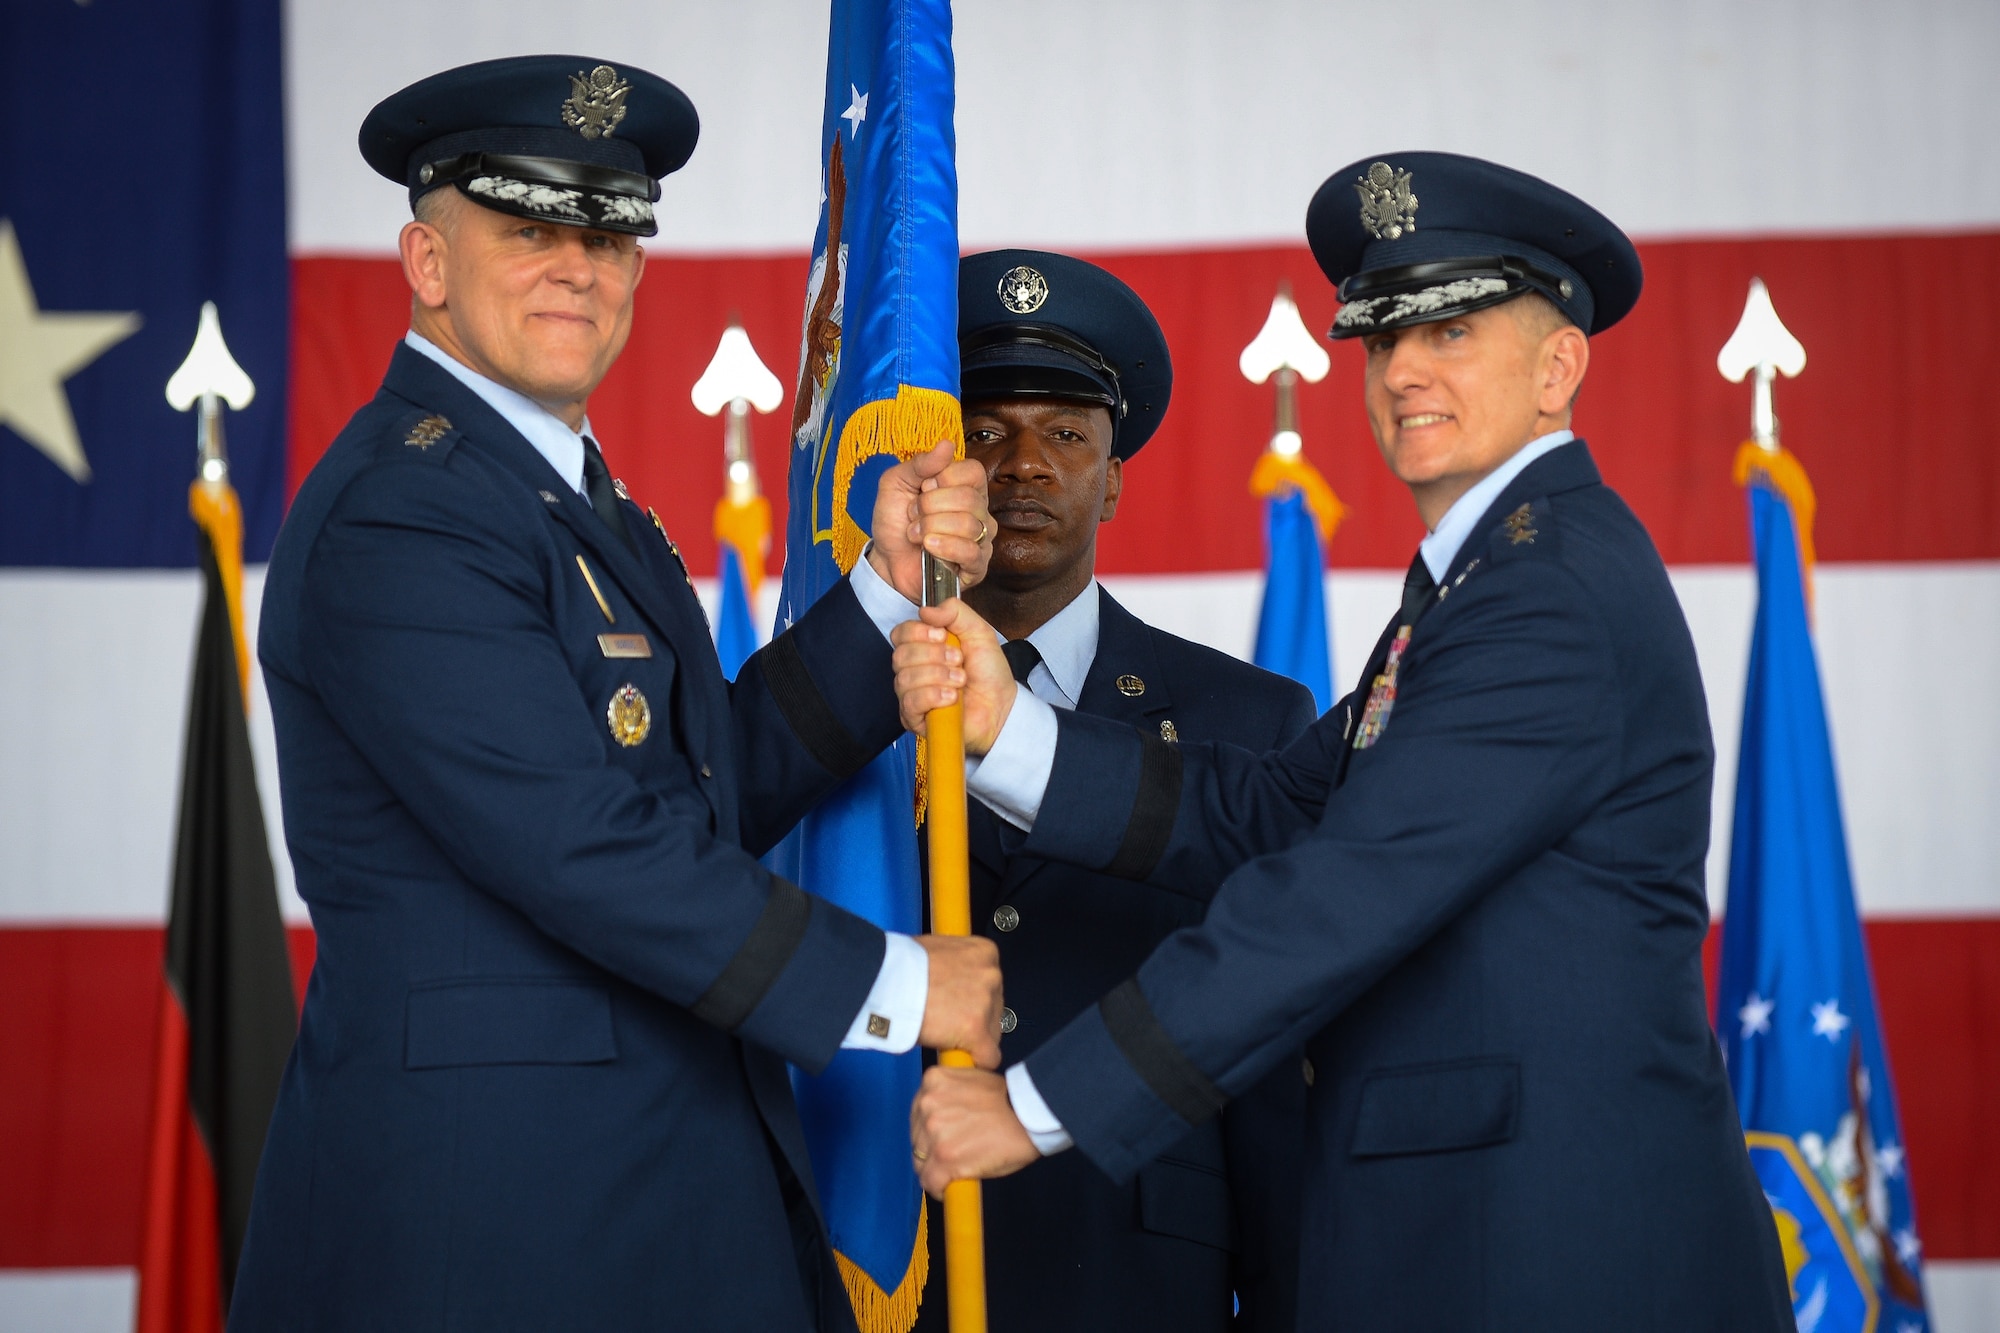 Lt. Gen. Timothy M. Ray, Third Air Force and 17th Expeditionary Air Force incoming commander, takes the guidon from, Gen. Frank Gorenc, U.S. Air Forces in Europe and U.S. Air Forces Africa commander July 2, 2015, at Ramstein Air Base, Germany.  It is military tradition that a guidon is exchanged between commanders to symbolize the passing of command. (U.S. Air Force photo/Senior Airman Nicole Sikorski)